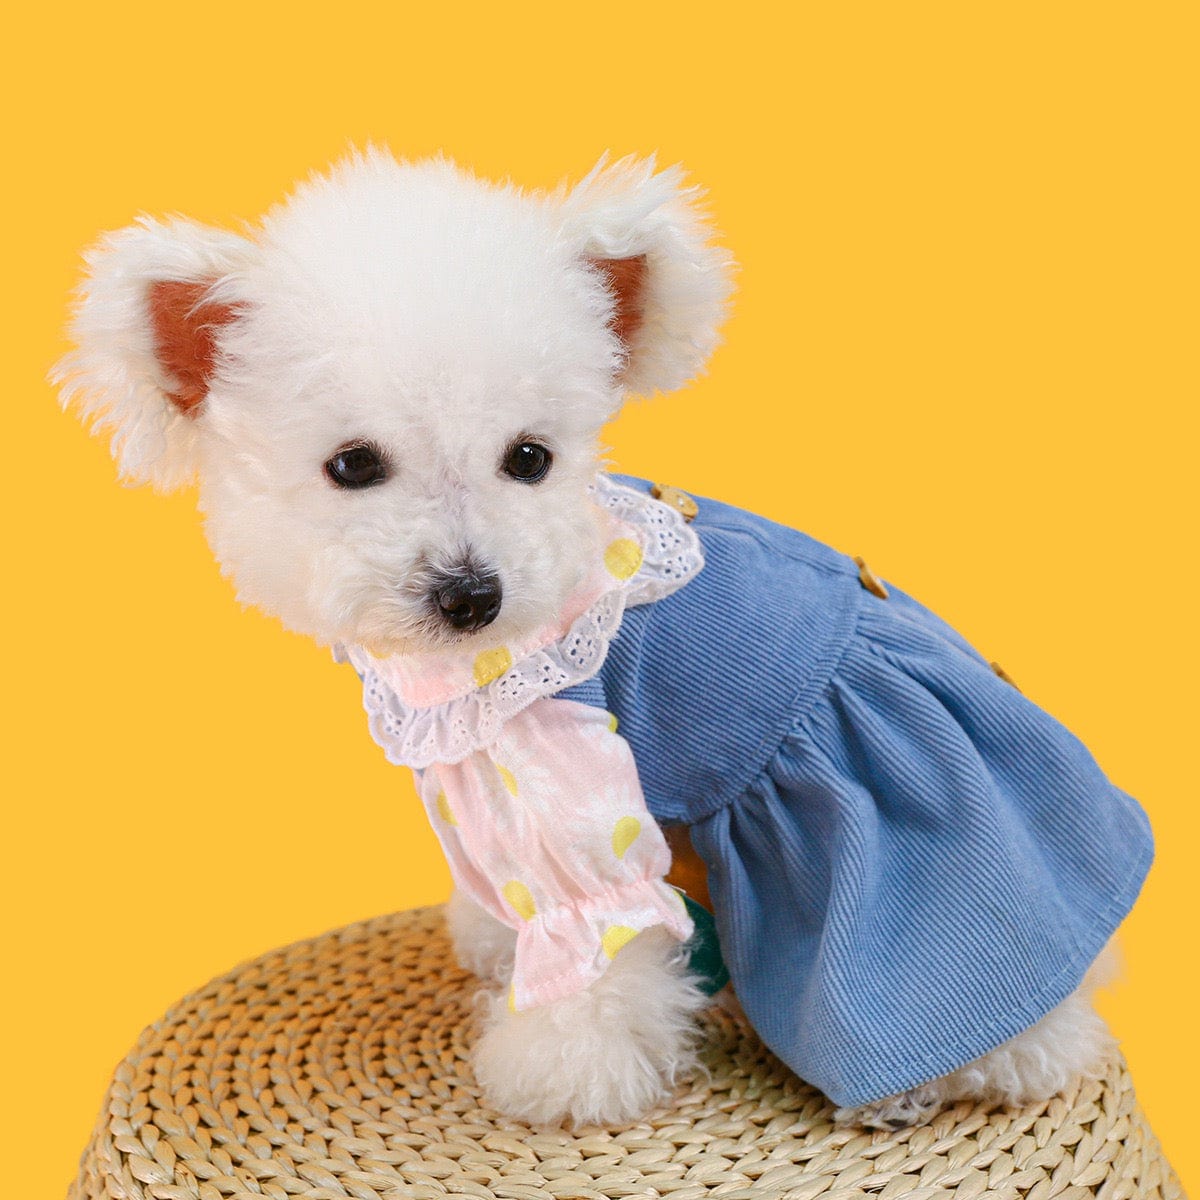 KUTKUT Cute Soft Bear Button Floral Dress for Small Dogs and Cats, Brethable Summer Dress for Yorkie, Maltese and Other Small Dogs (Blue) - kutkutstyle